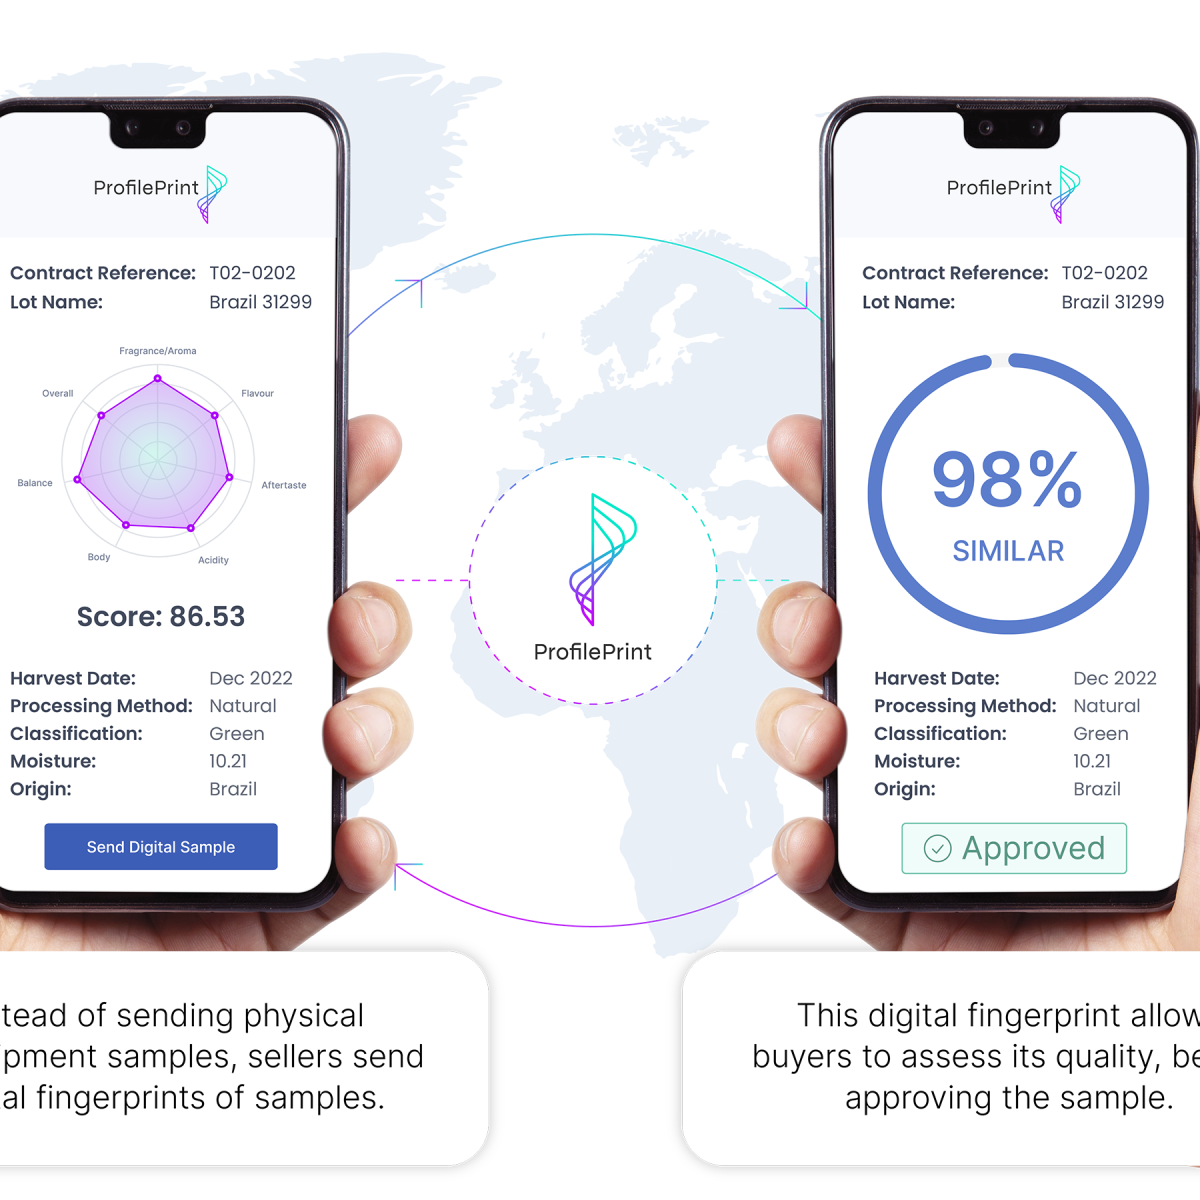 Singapore’s ProfilePrint completes Series B fundraising, strengthening its position as the neutral A.I. Ingredient Quality Platform